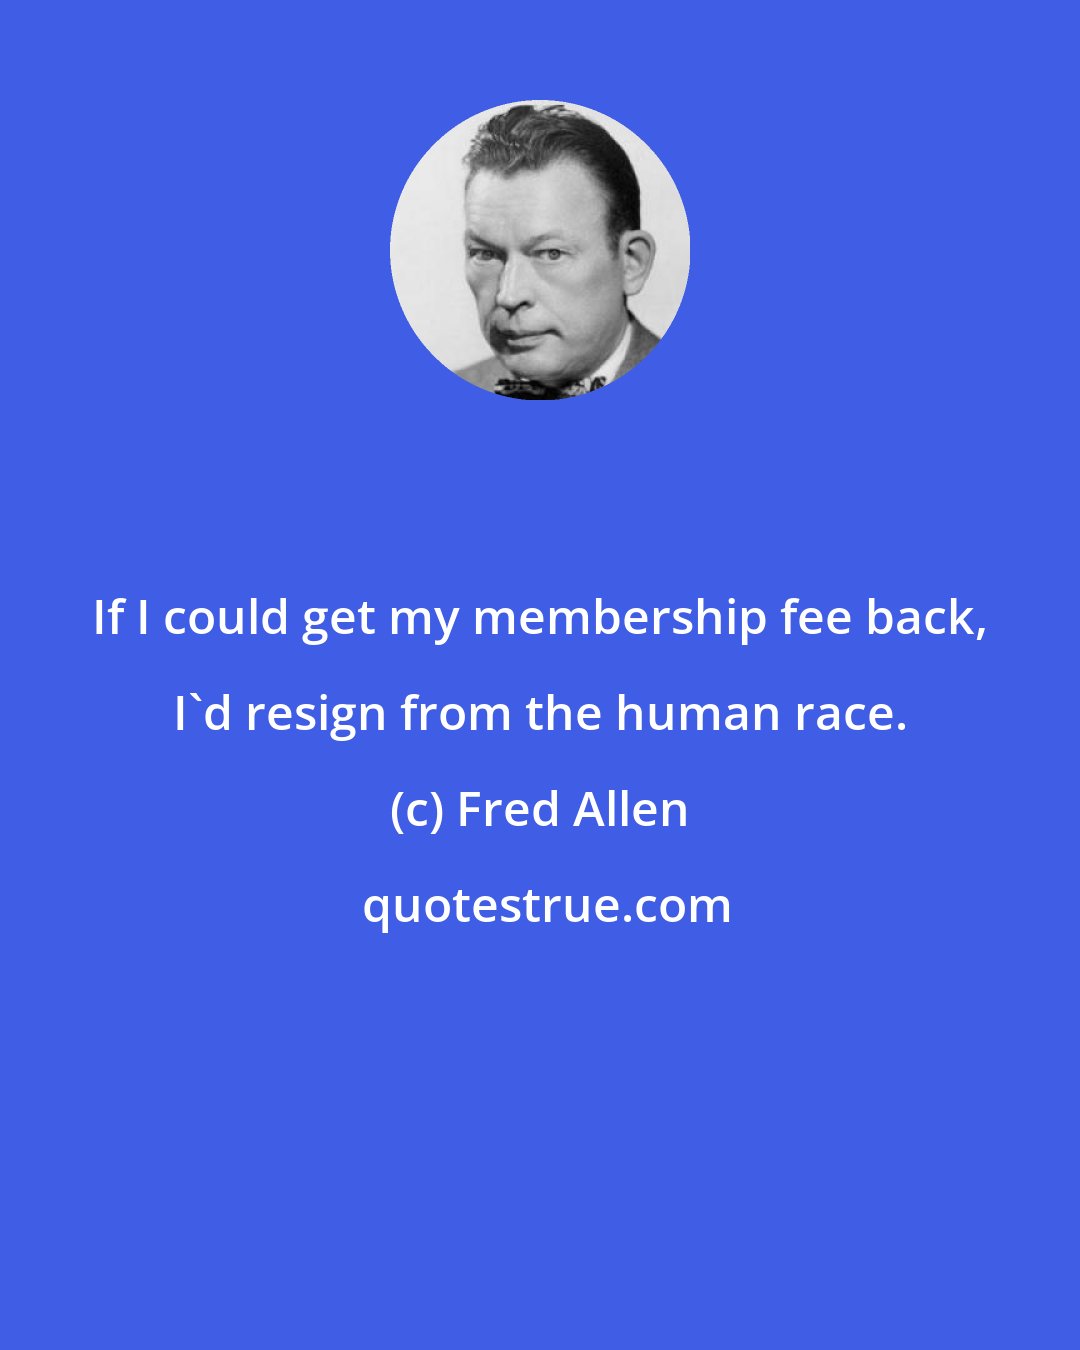 Fred Allen: If I could get my membership fee back, I'd resign from the human race.